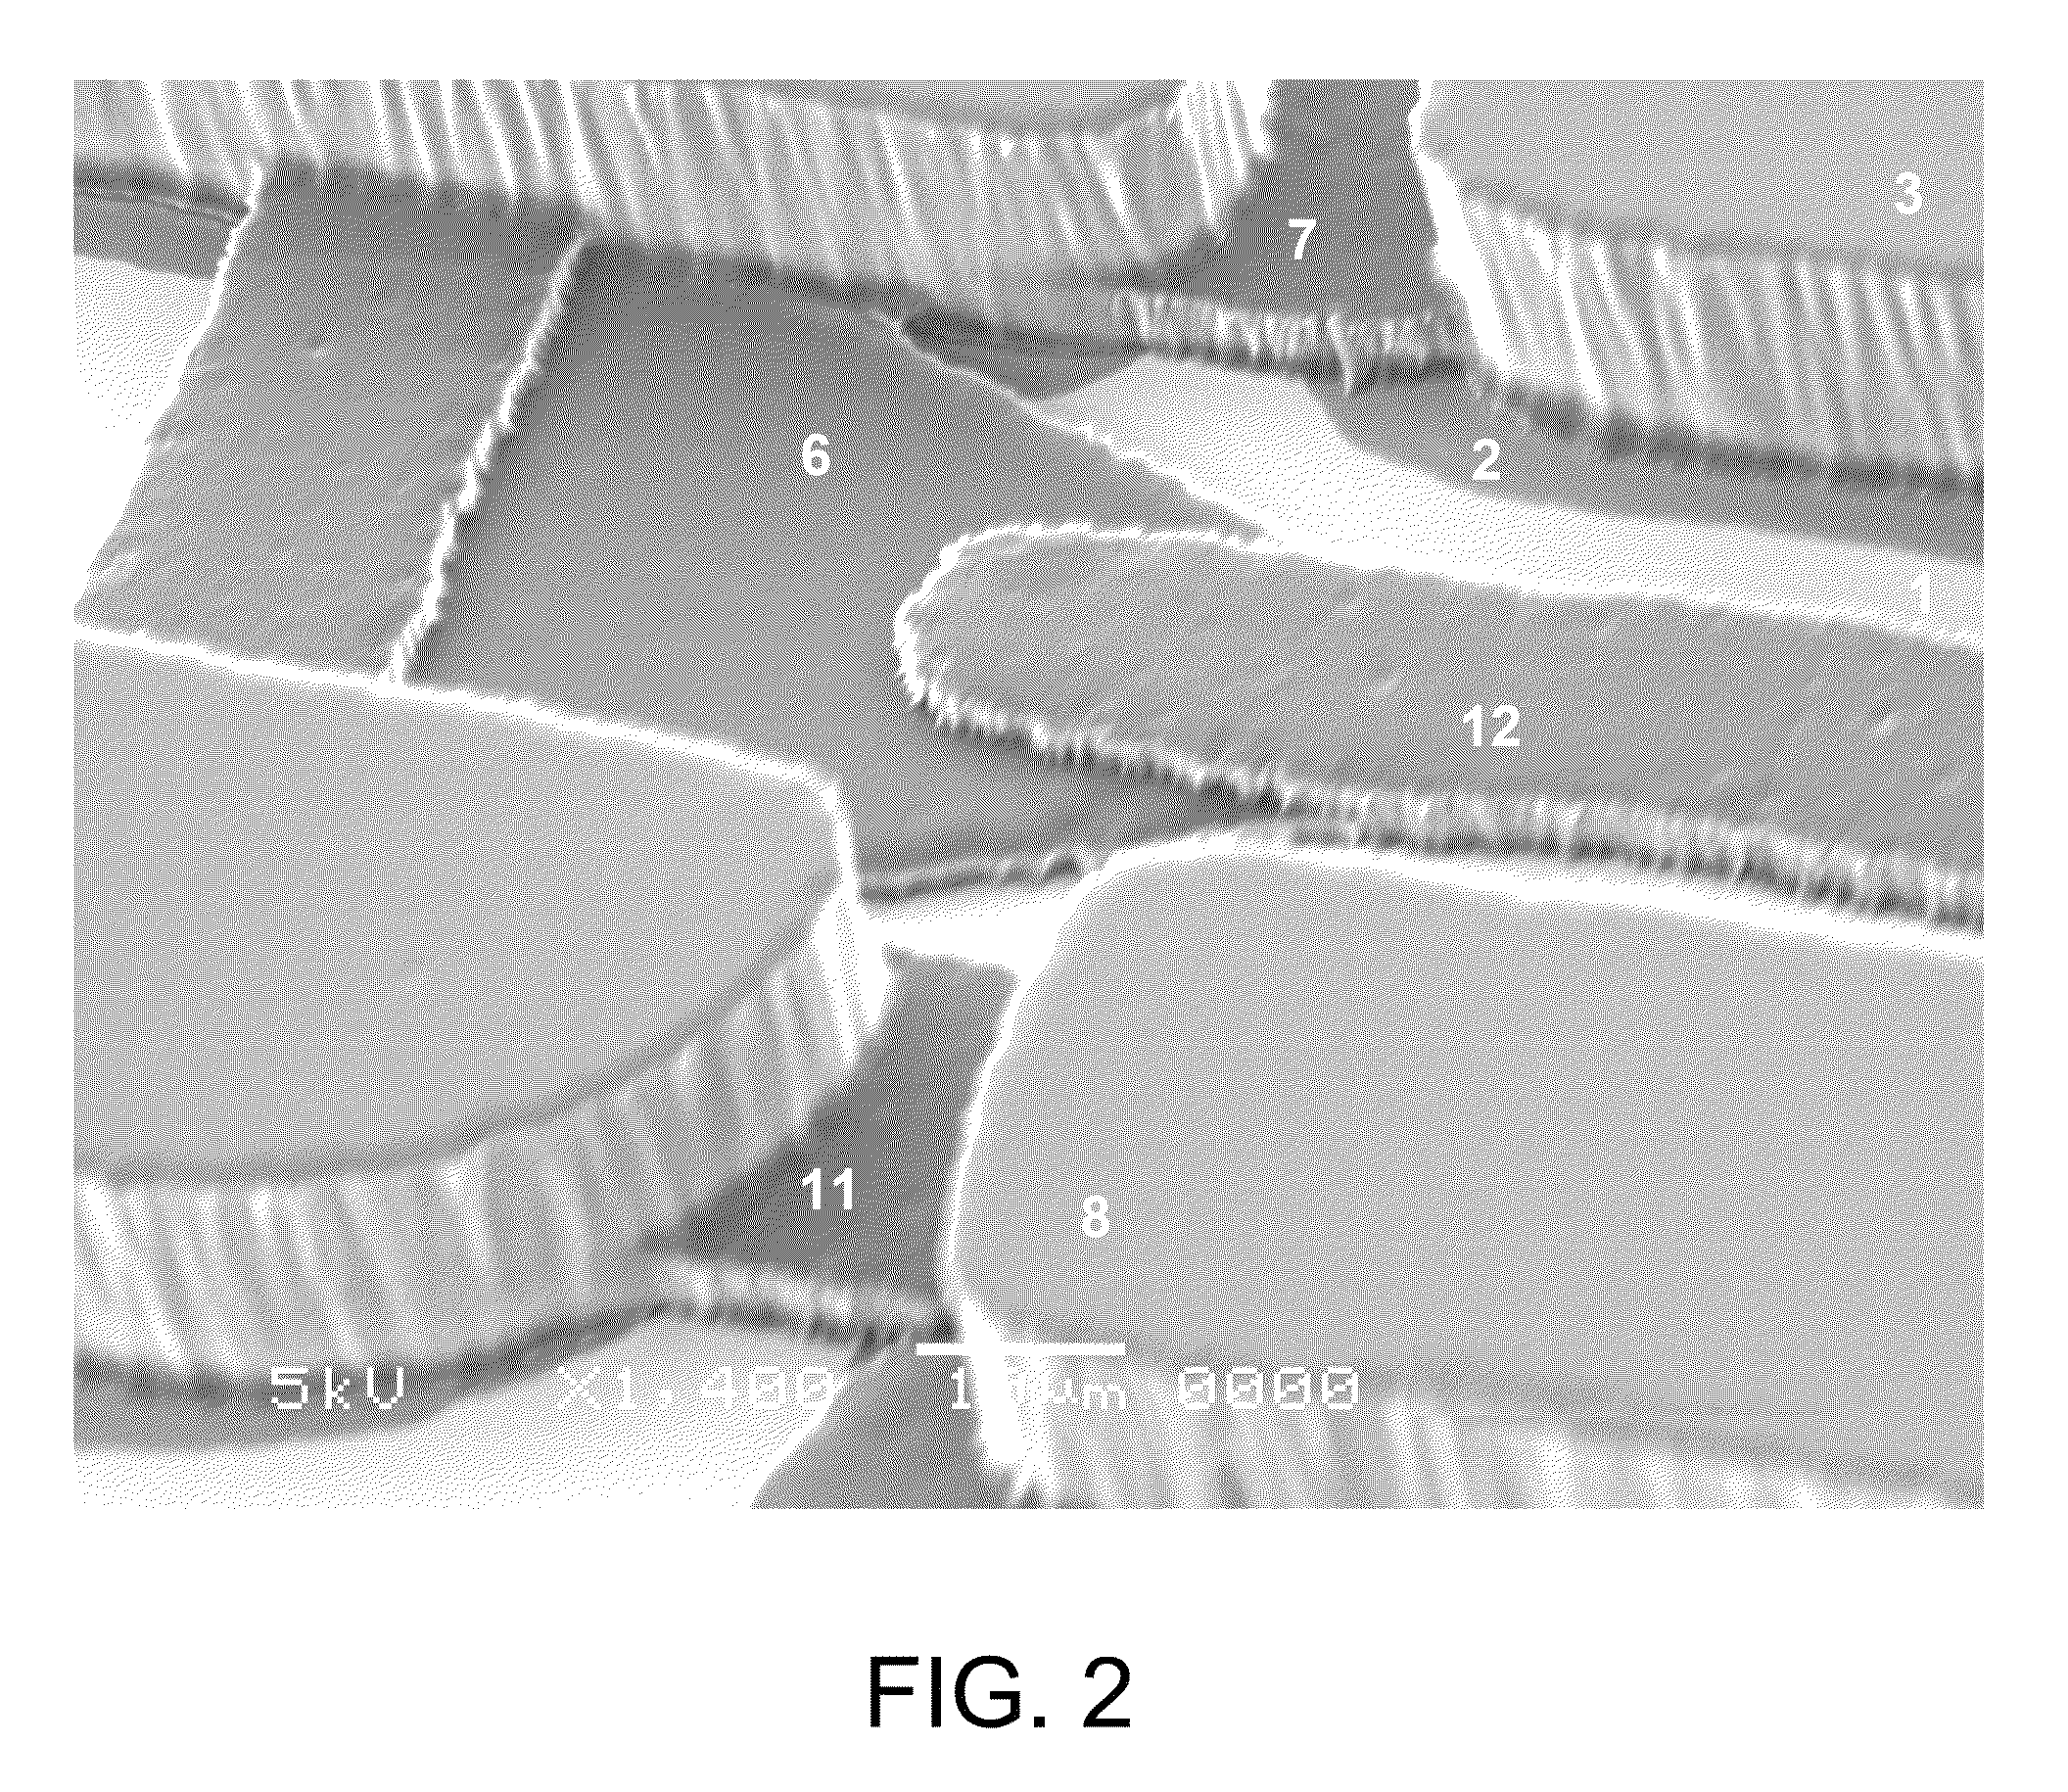 Device and method for contacting picoliter volumes of fluids